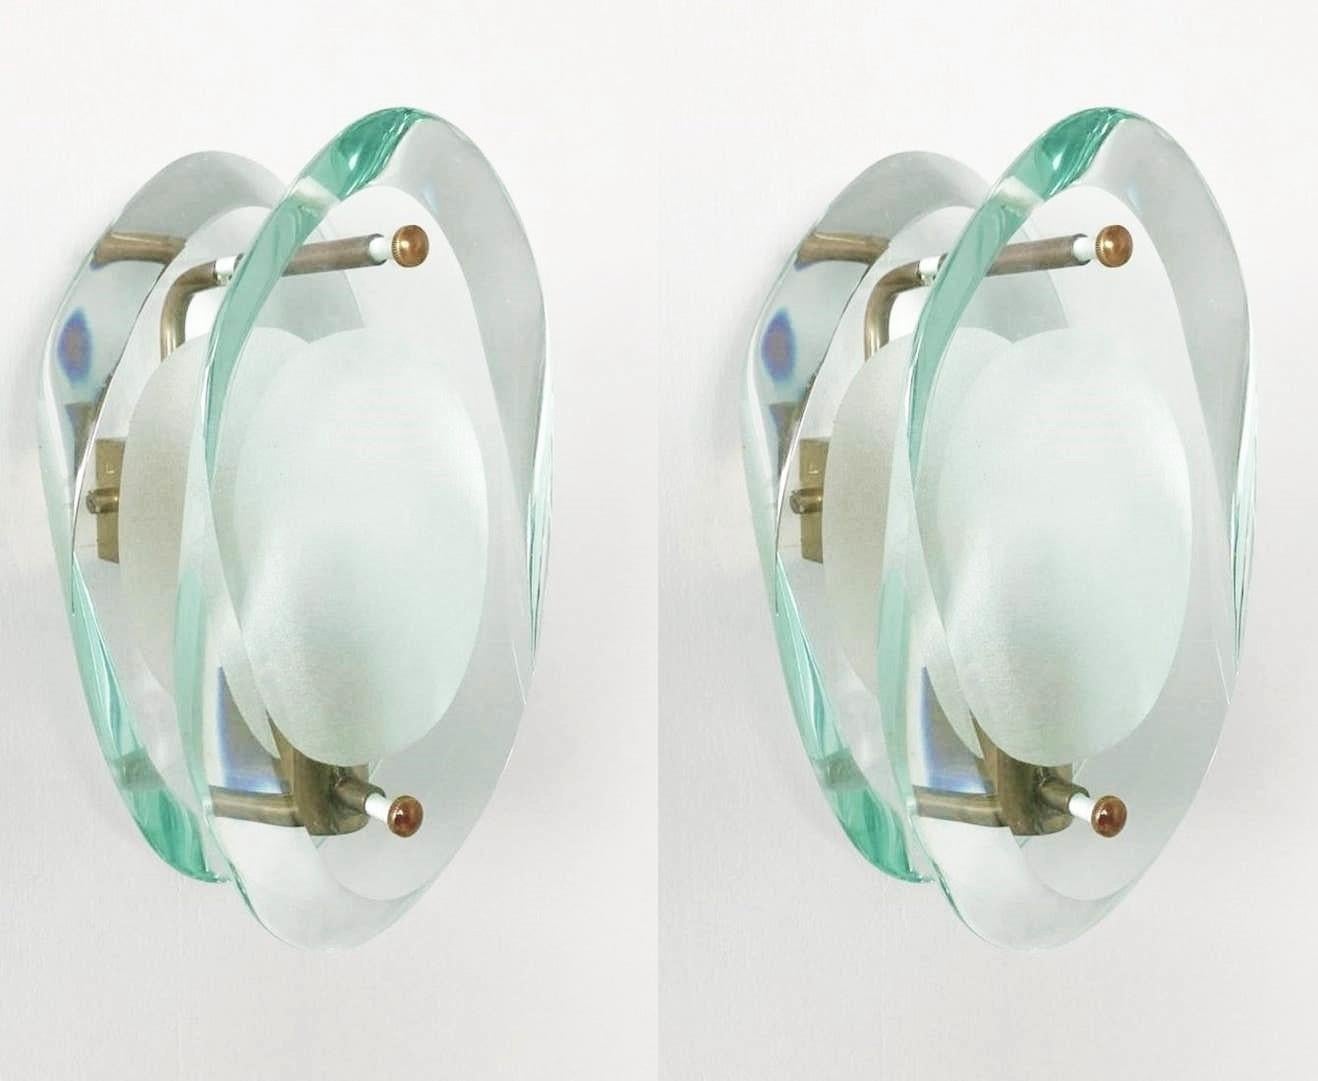 A pair of wall lights sconces by Max Ingrand for Fontana Arte, Model 2093, Italy, 1960-1961. Organically shaped double lens cut panels of of thick profiled polished Murano glass with sandblasted centers, brass mounted. The Model 2093 is one of the